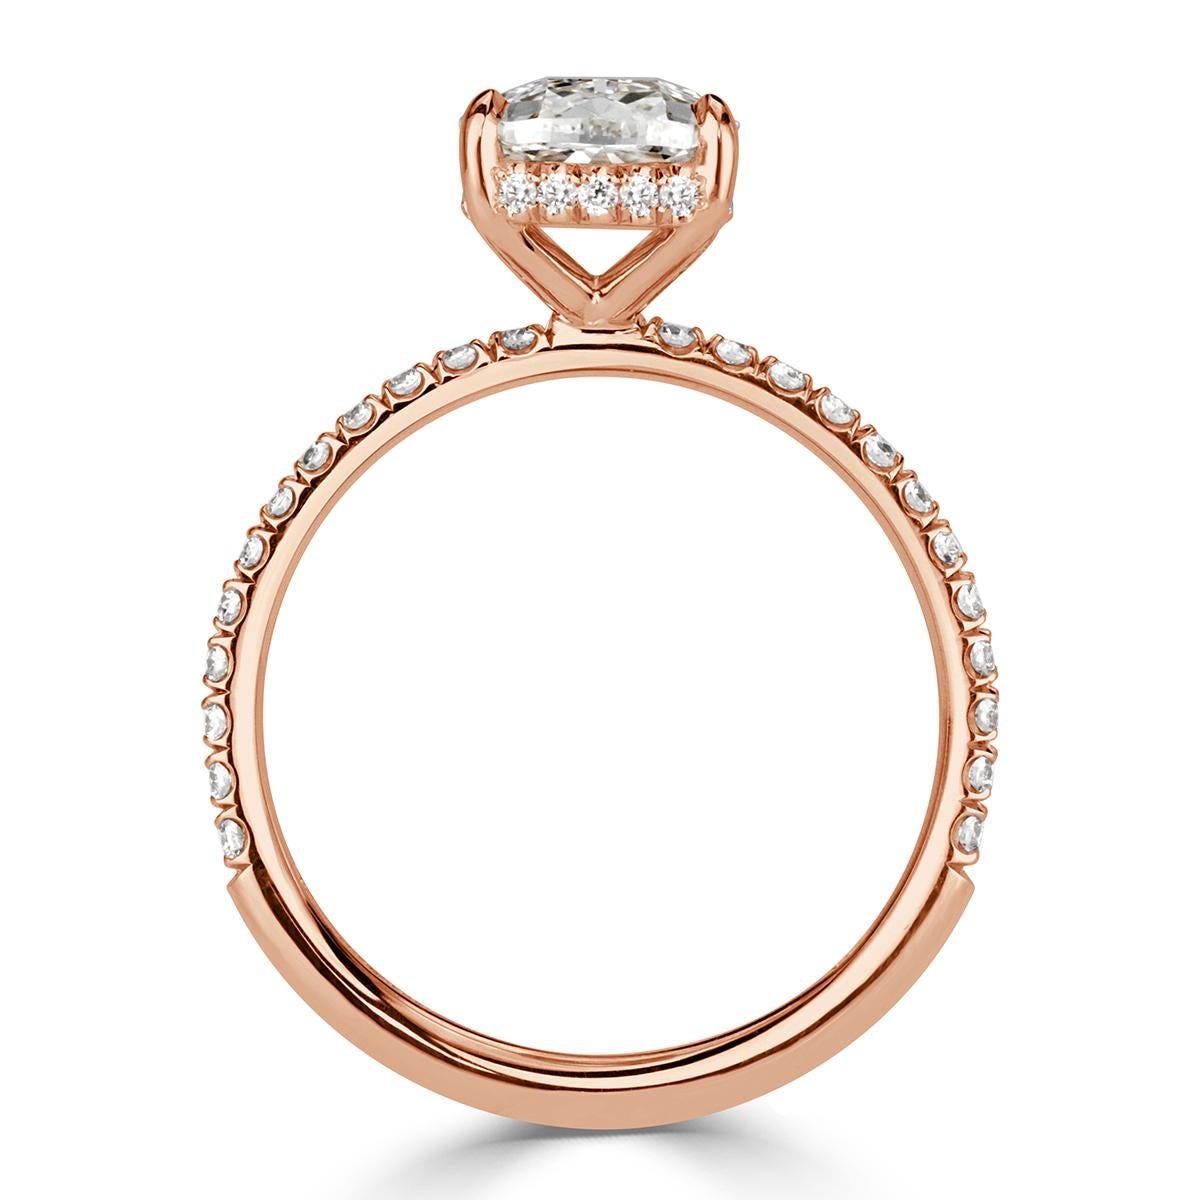 Created to perfection in our custom 18k rose gold, this one of a kind diamond engagement ring showcases a stunning 2.03ct old Mine cut center diamond, GIA certified at J-VVS2. It measures at an incredible 10.03 x 7.02mm which make it look much